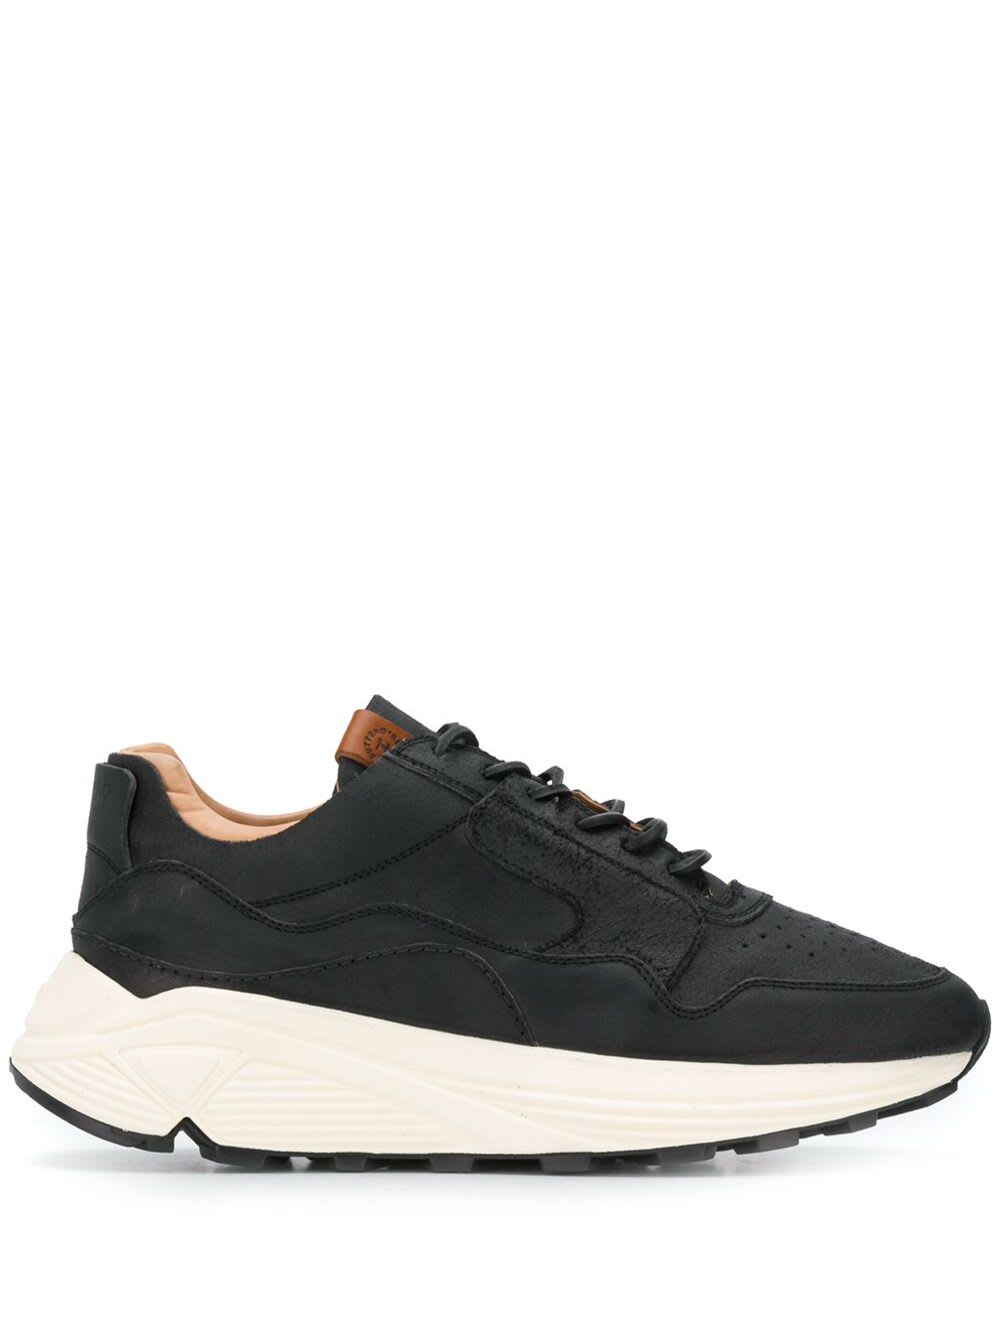 Buttero Vinci Leather Sneakers With Oversize Sole